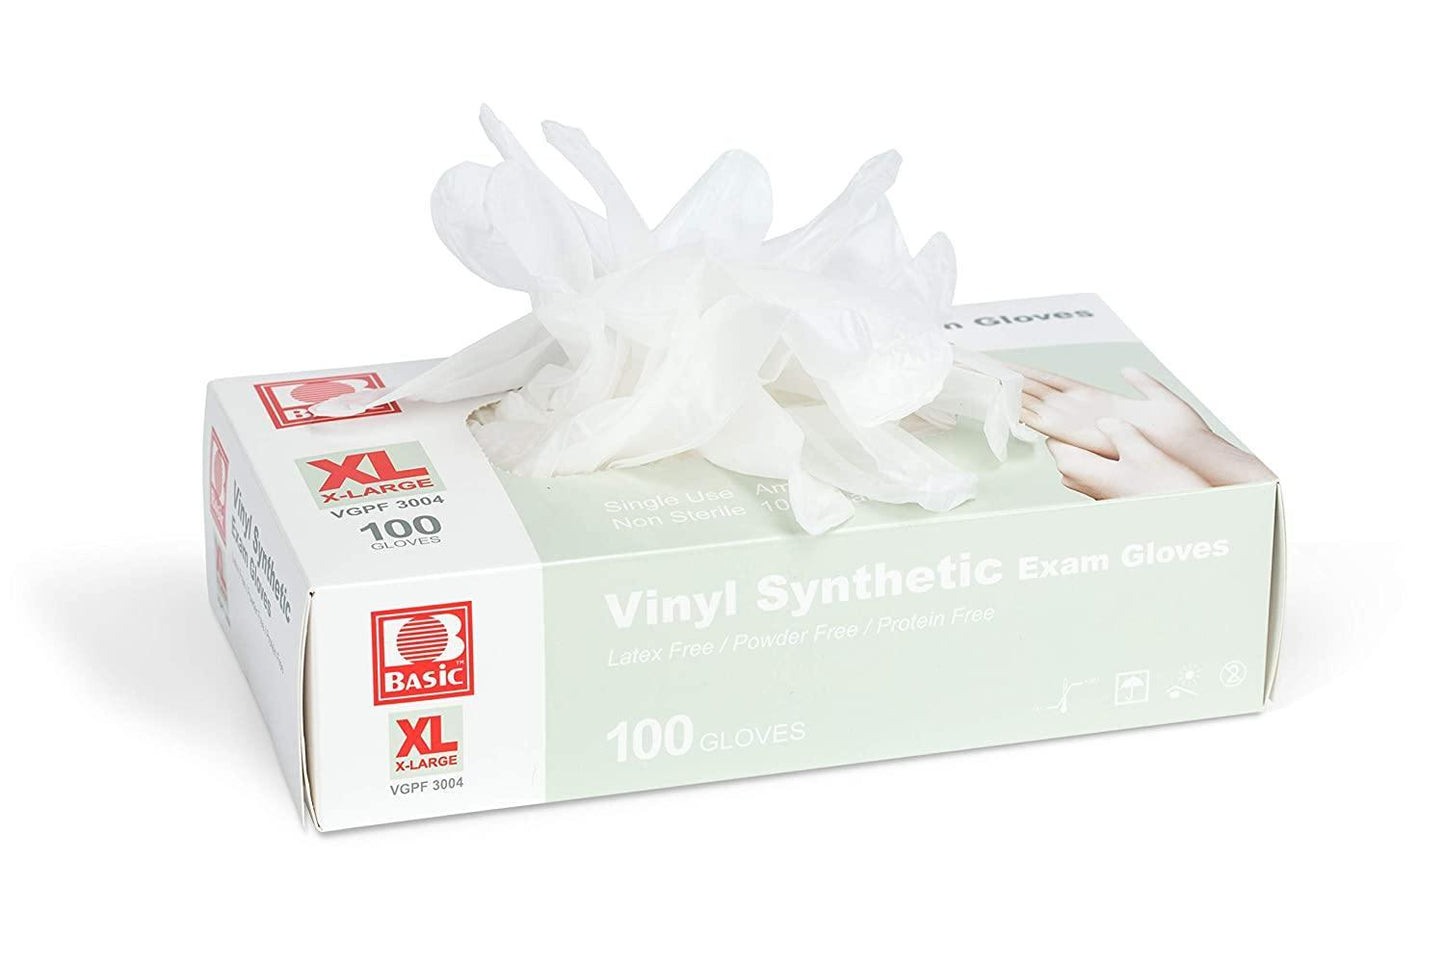 Vynil Synthetic Gloves (100/box) Basic Powder-Free, Latex-Free, Protein-Free - FirstAidPlus